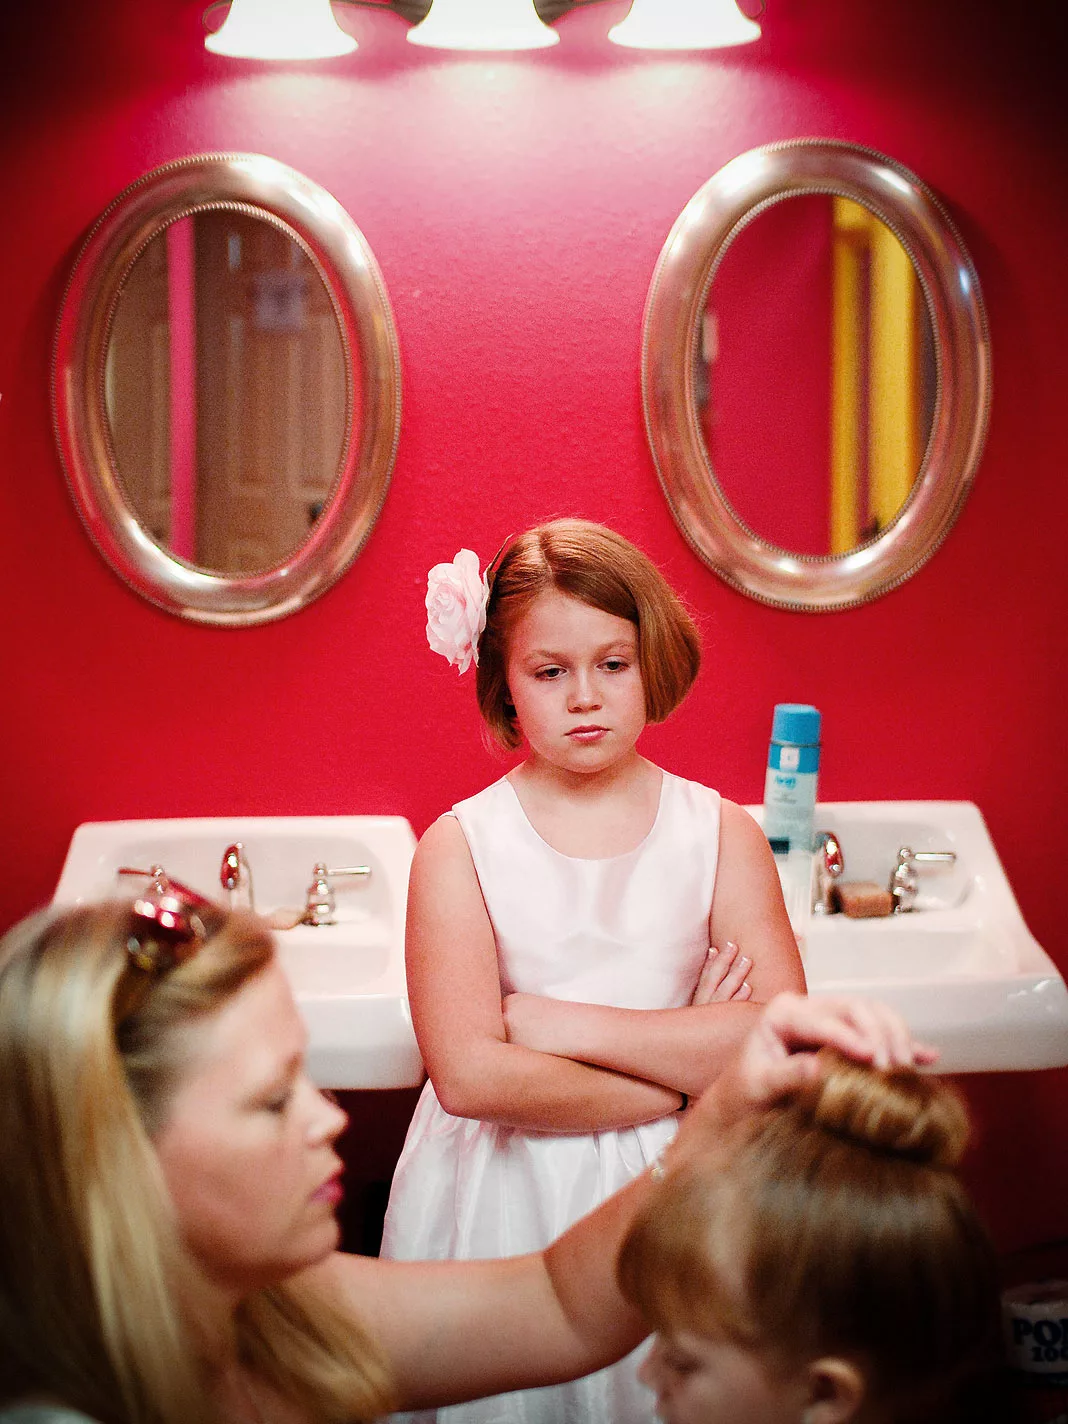 A jealous sibling stares down her sister in a pink room captured in San Antonio, Texas by photographer Philip Thomas